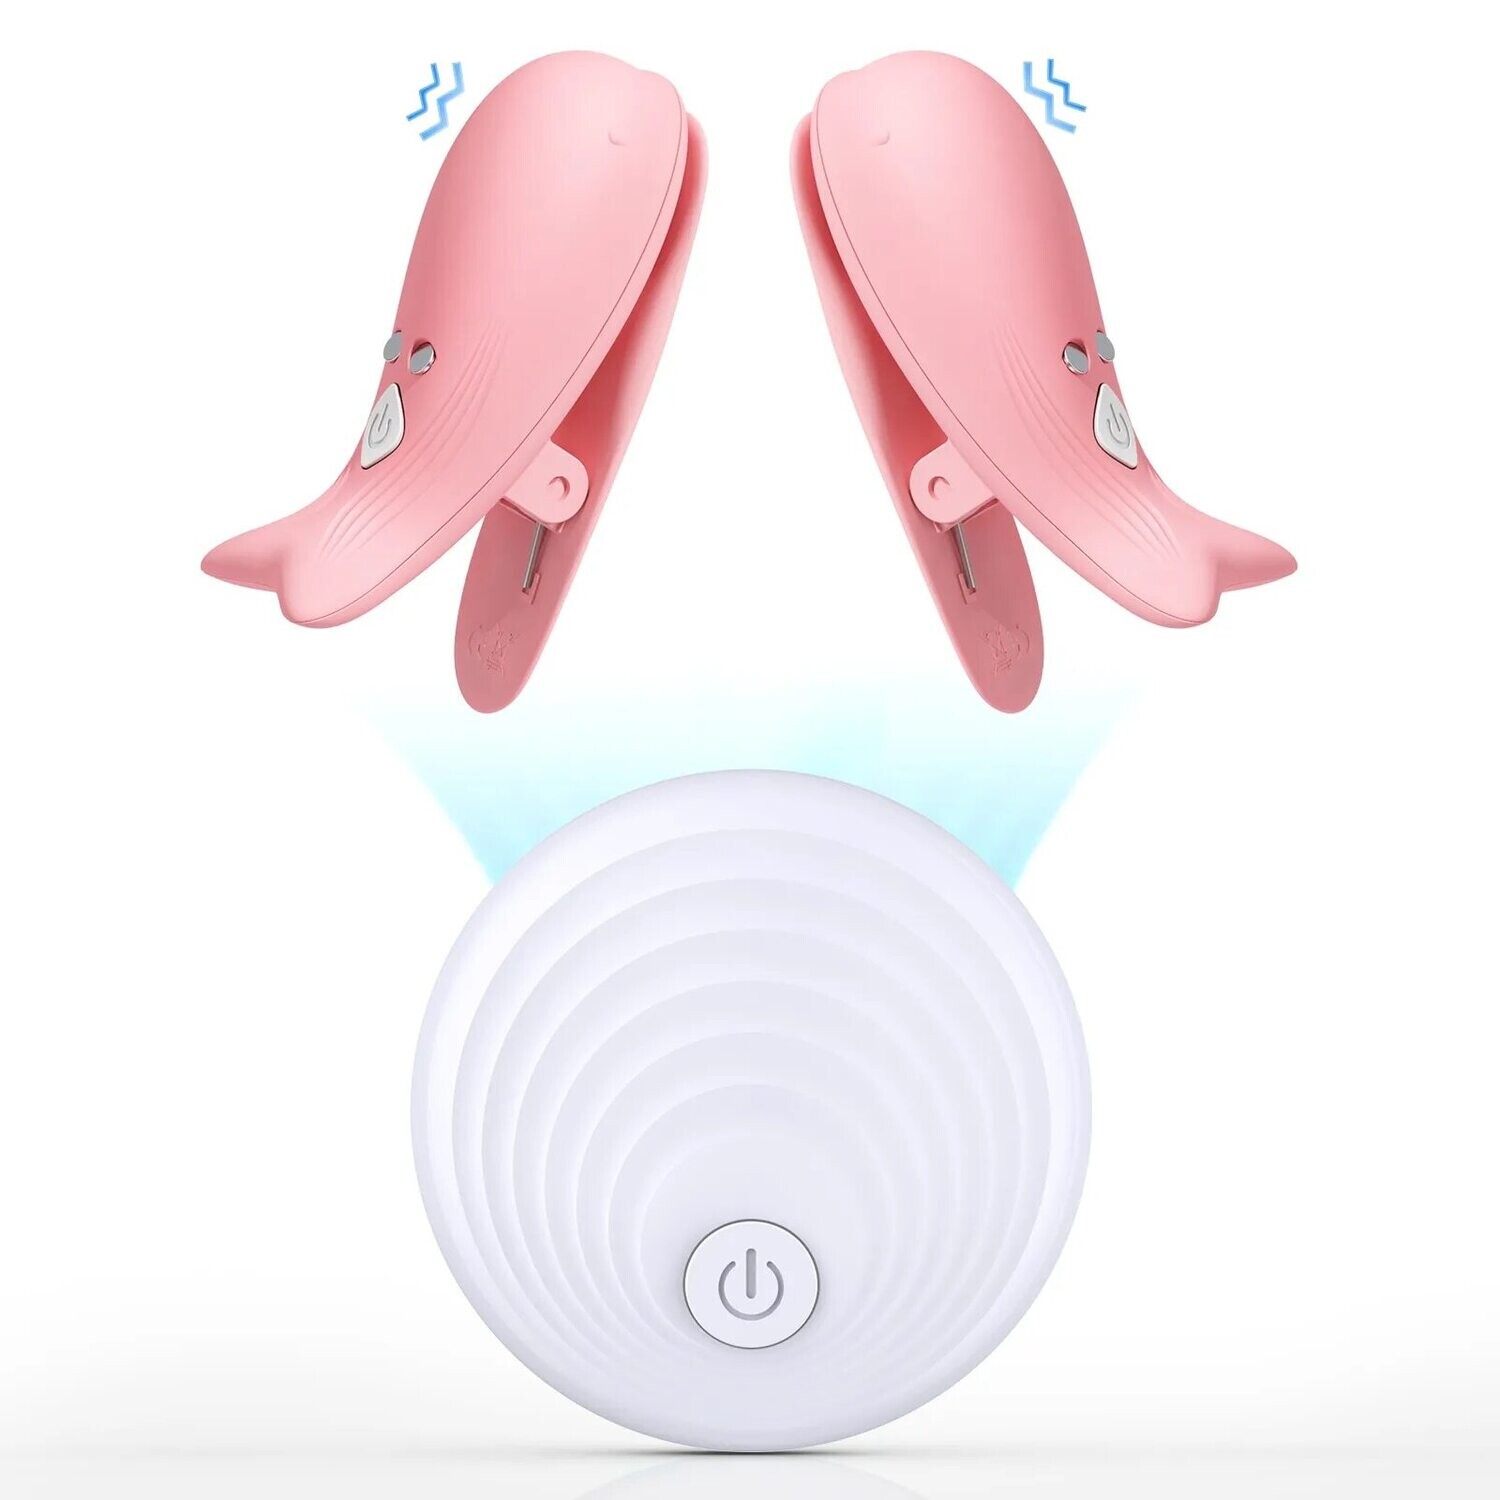 OhGiii. Wireless Dolphin. 10 Speeds Vibrating Nipple Breast Clamp Massager Wireless Remote Control Sex Toy